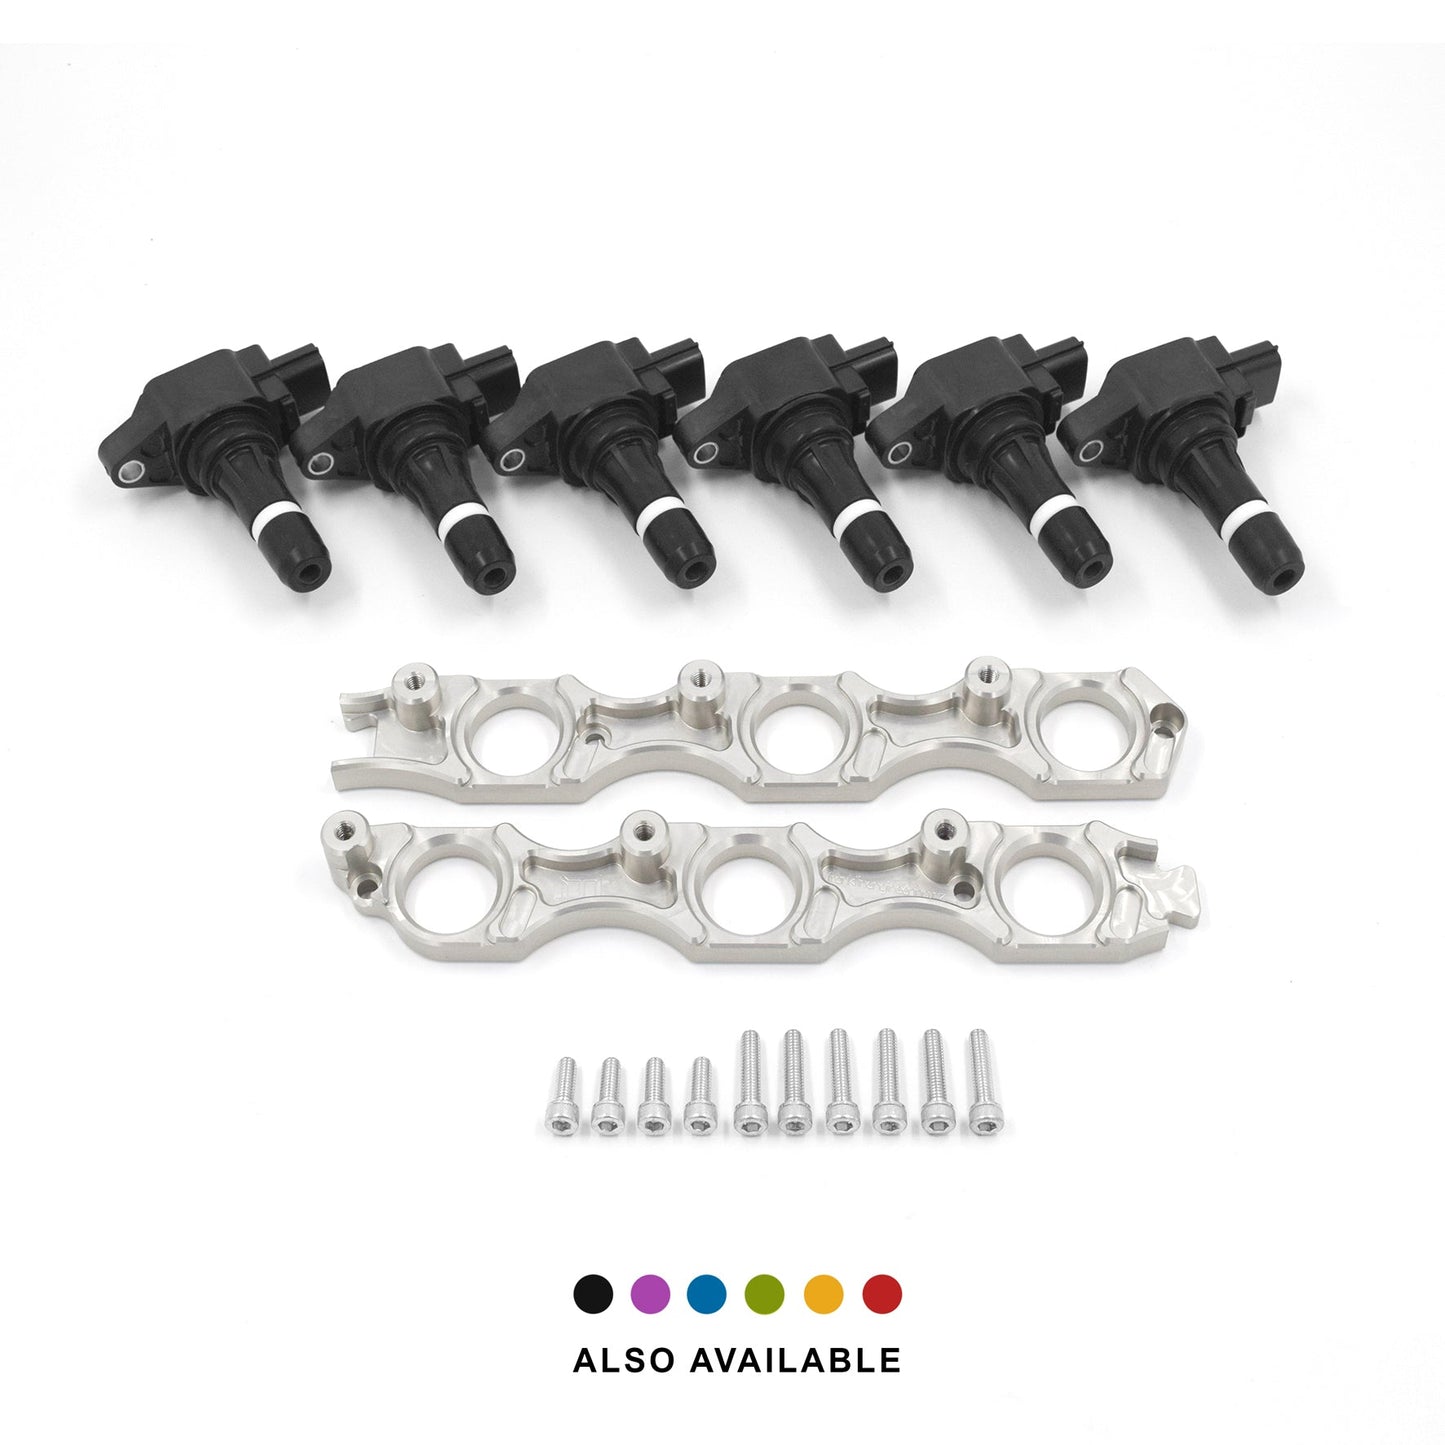 VR38 Coil Conversion Kit for Toyota JZ Engines